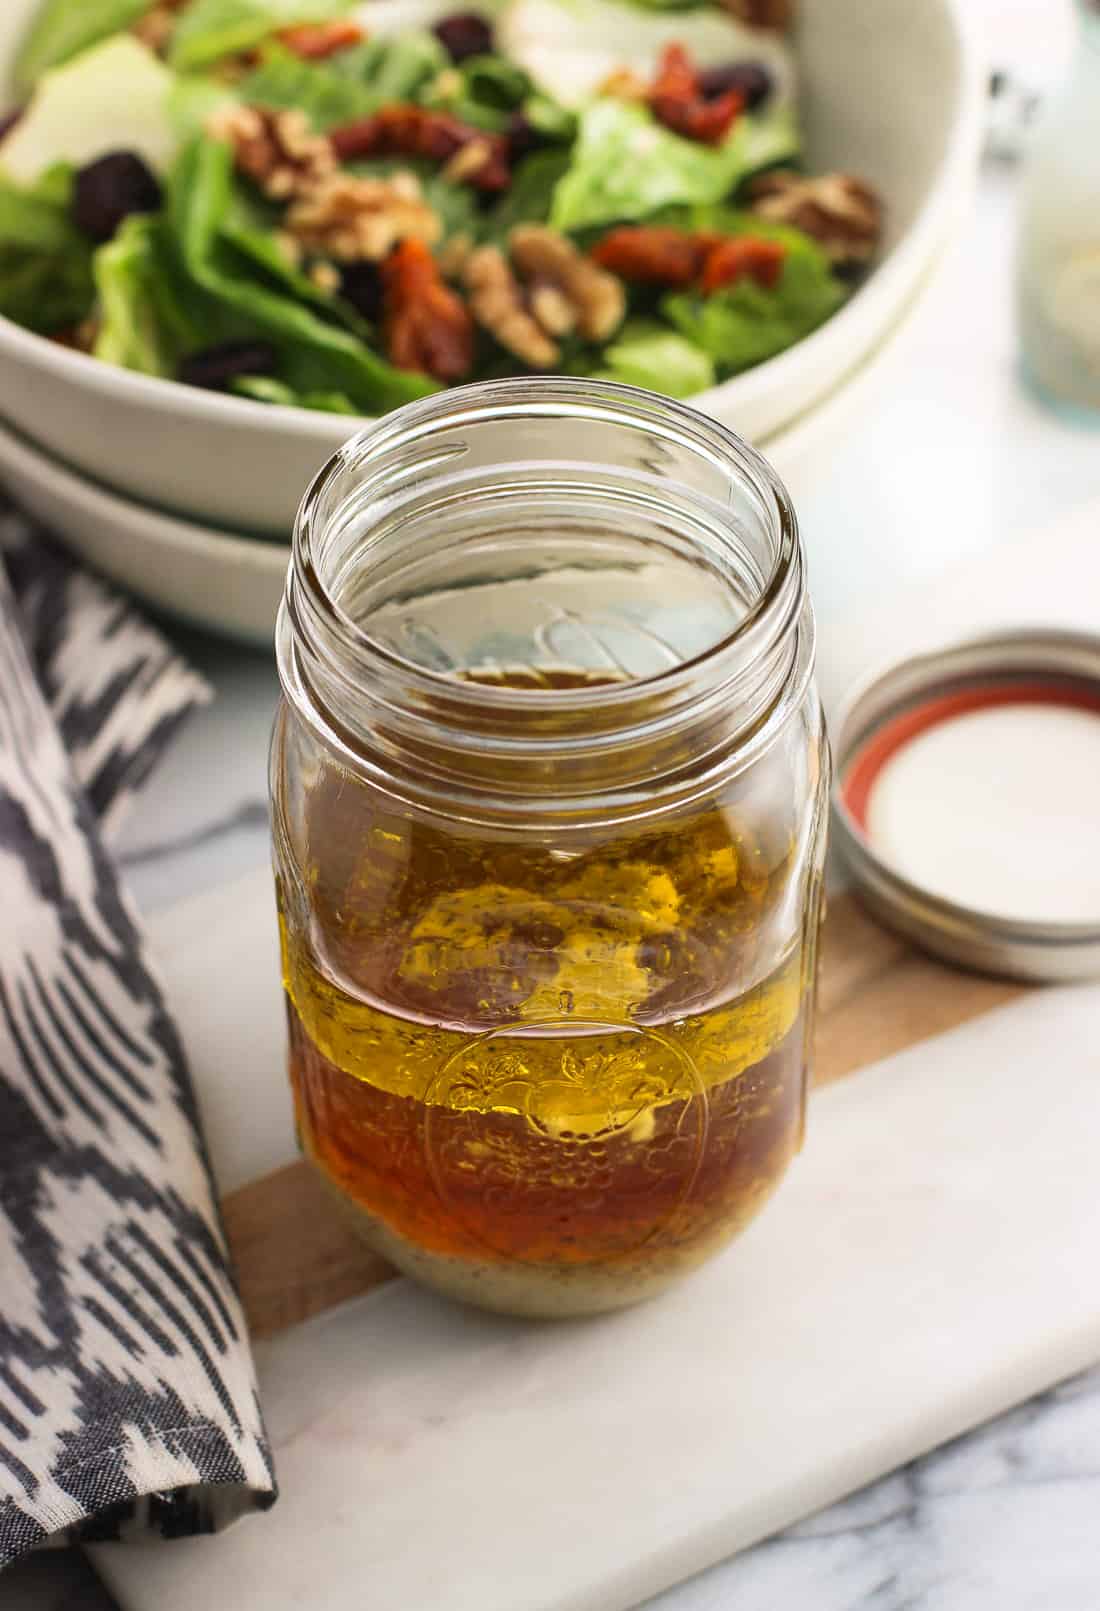 All of the vinaigrette ingredients poured into a mason jar, before being shaken